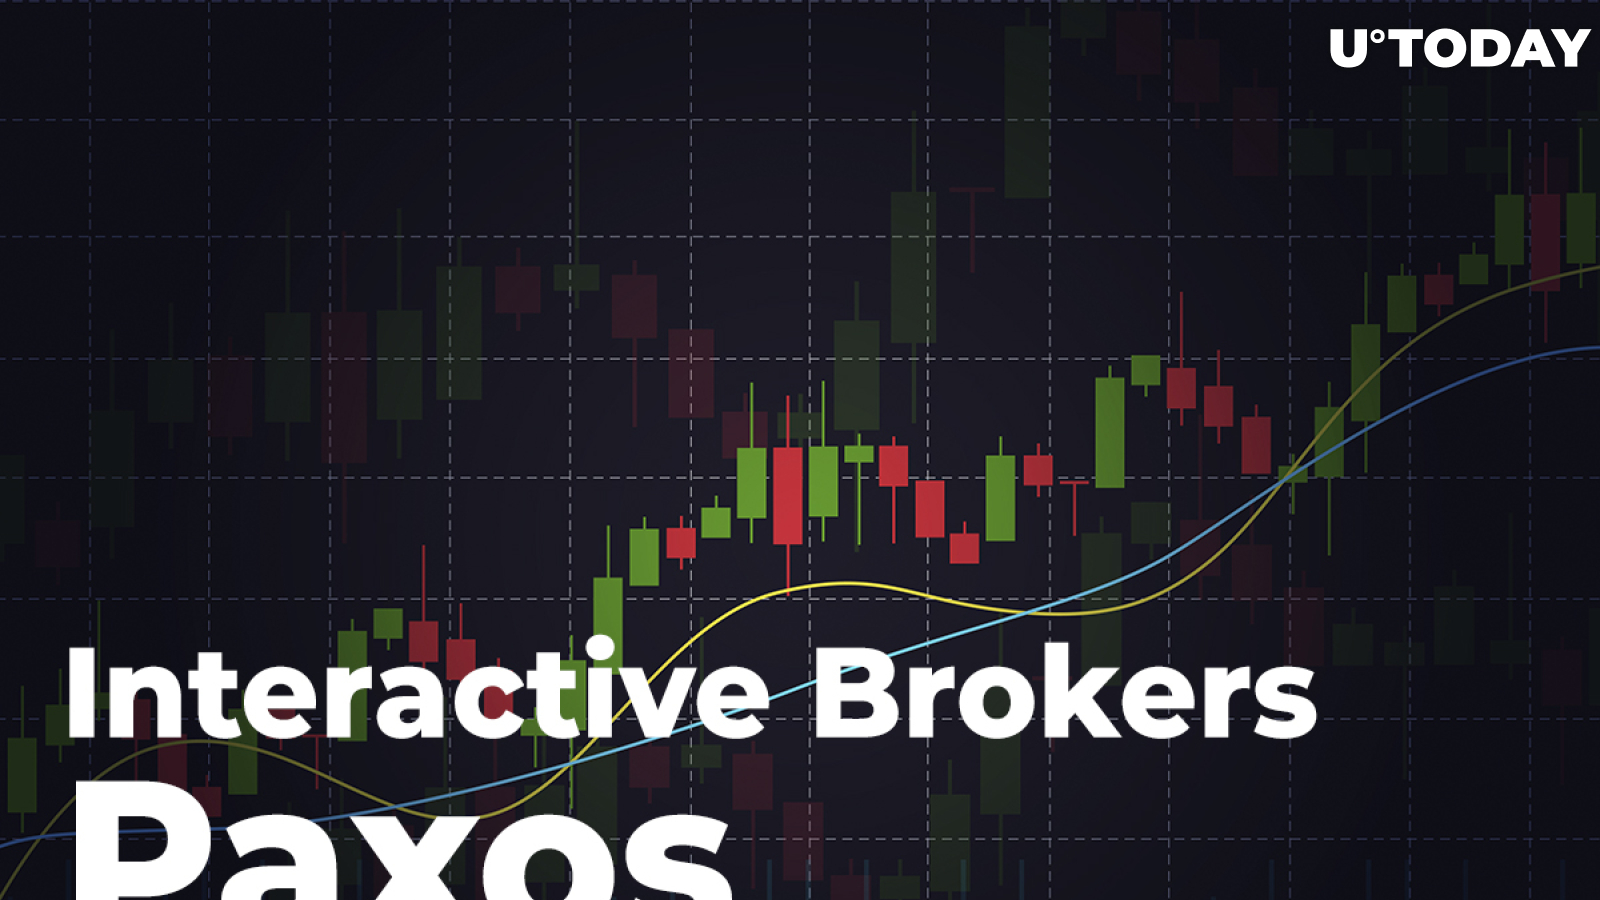 Interactive Brokers Announced Launch of Cryptocurrency Trading Via Paxos